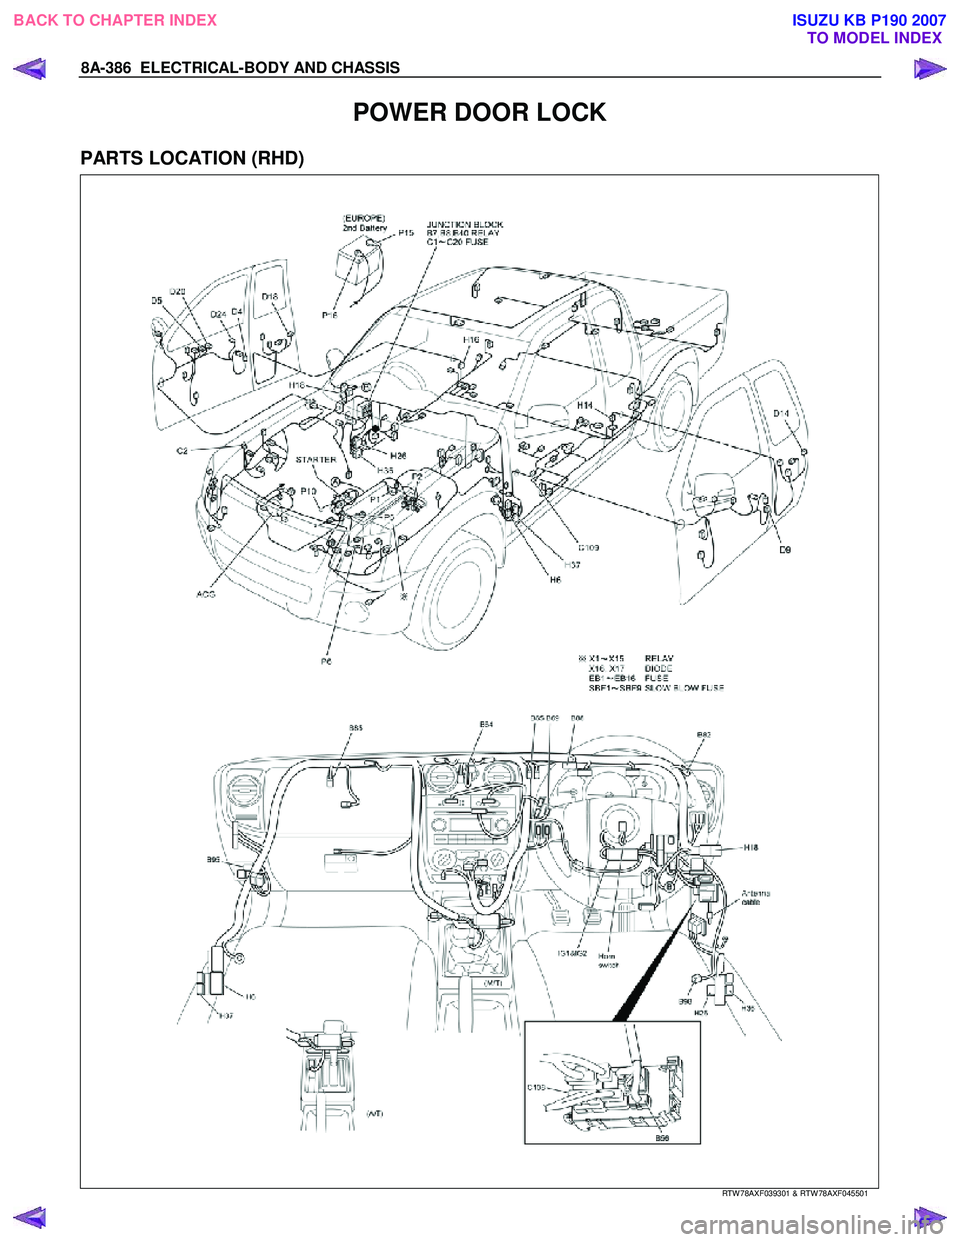 ISUZU KB P190 2007  Workshop Owners Guide 8A-386  ELECTRICAL-BODY AND CHASSIS 
POWER DOOR LOCK 
PARTS LOCATION (RHD) 
   
 
 
 
 
 
   
RTW 78AXF039301 & RTW 78AXF045501 
 
BACK TO CHAPTER INDEX
TO MODEL INDEXISUZU KB P190 2007 